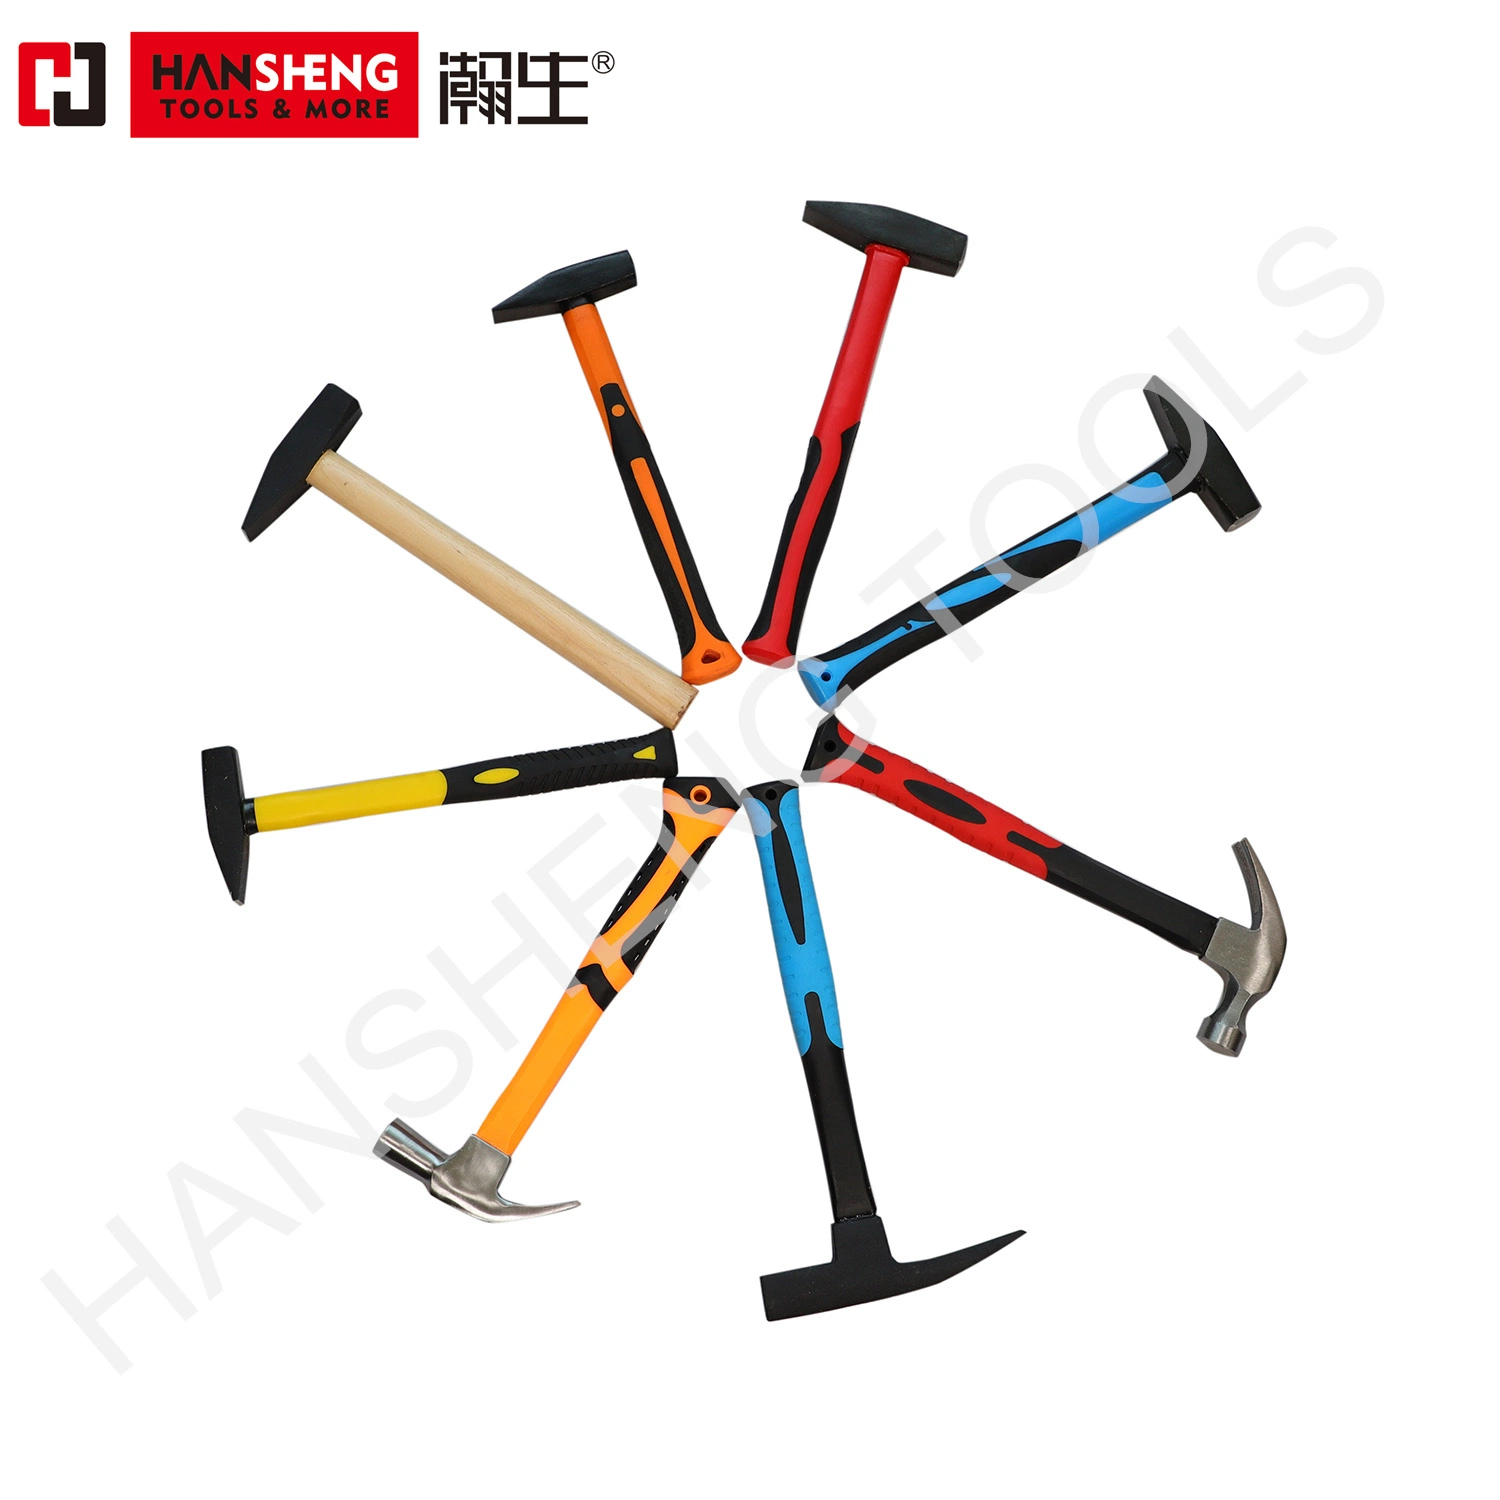 Professional Hammer,Hand Tool,Hardware,Made of Carbon Steel, Full Head Polished, Mirror Polish, Wooden Handle, PVC Handle, Glass Fibre Handle, Machinist Hammer